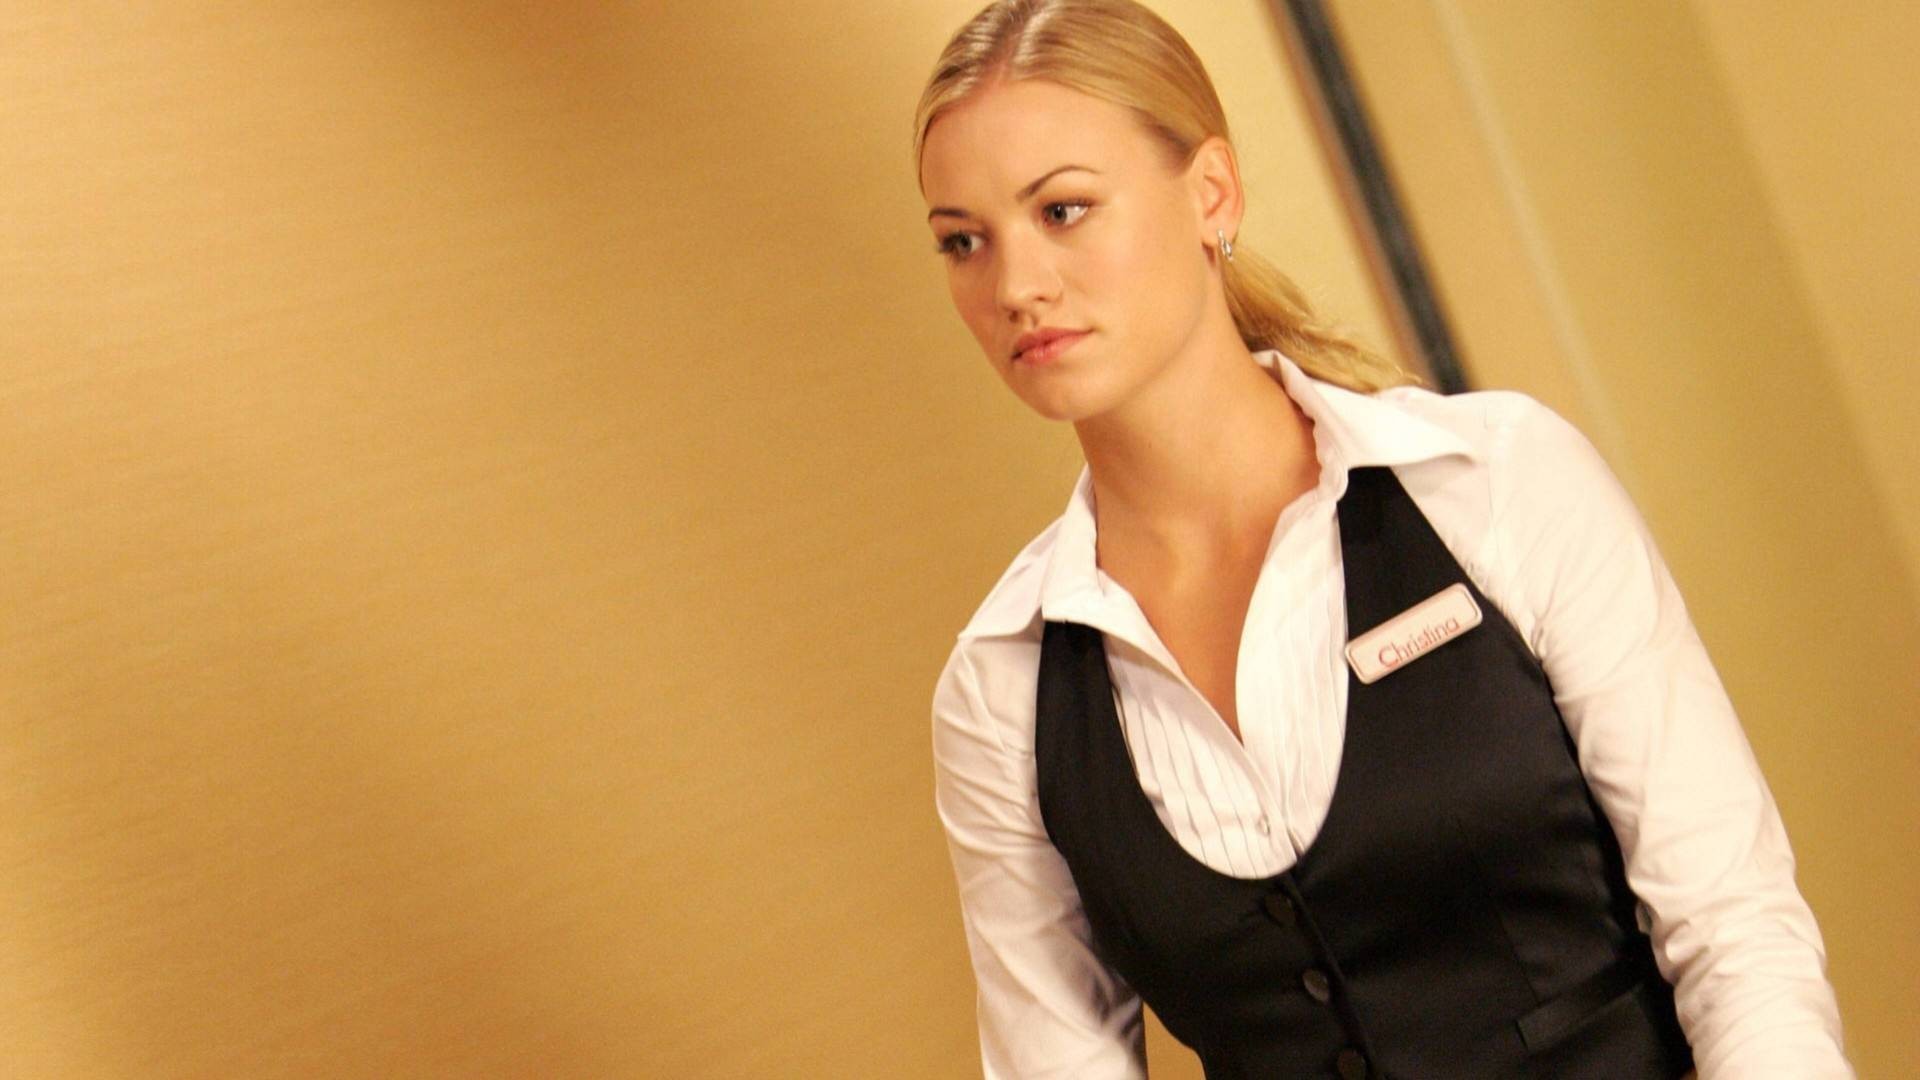 1920x1080 yvonne strahovski wallpaper 6 – HD Wallpapers , HD Backgrounds,Tumblr  Backgrounds, Images, Pictures